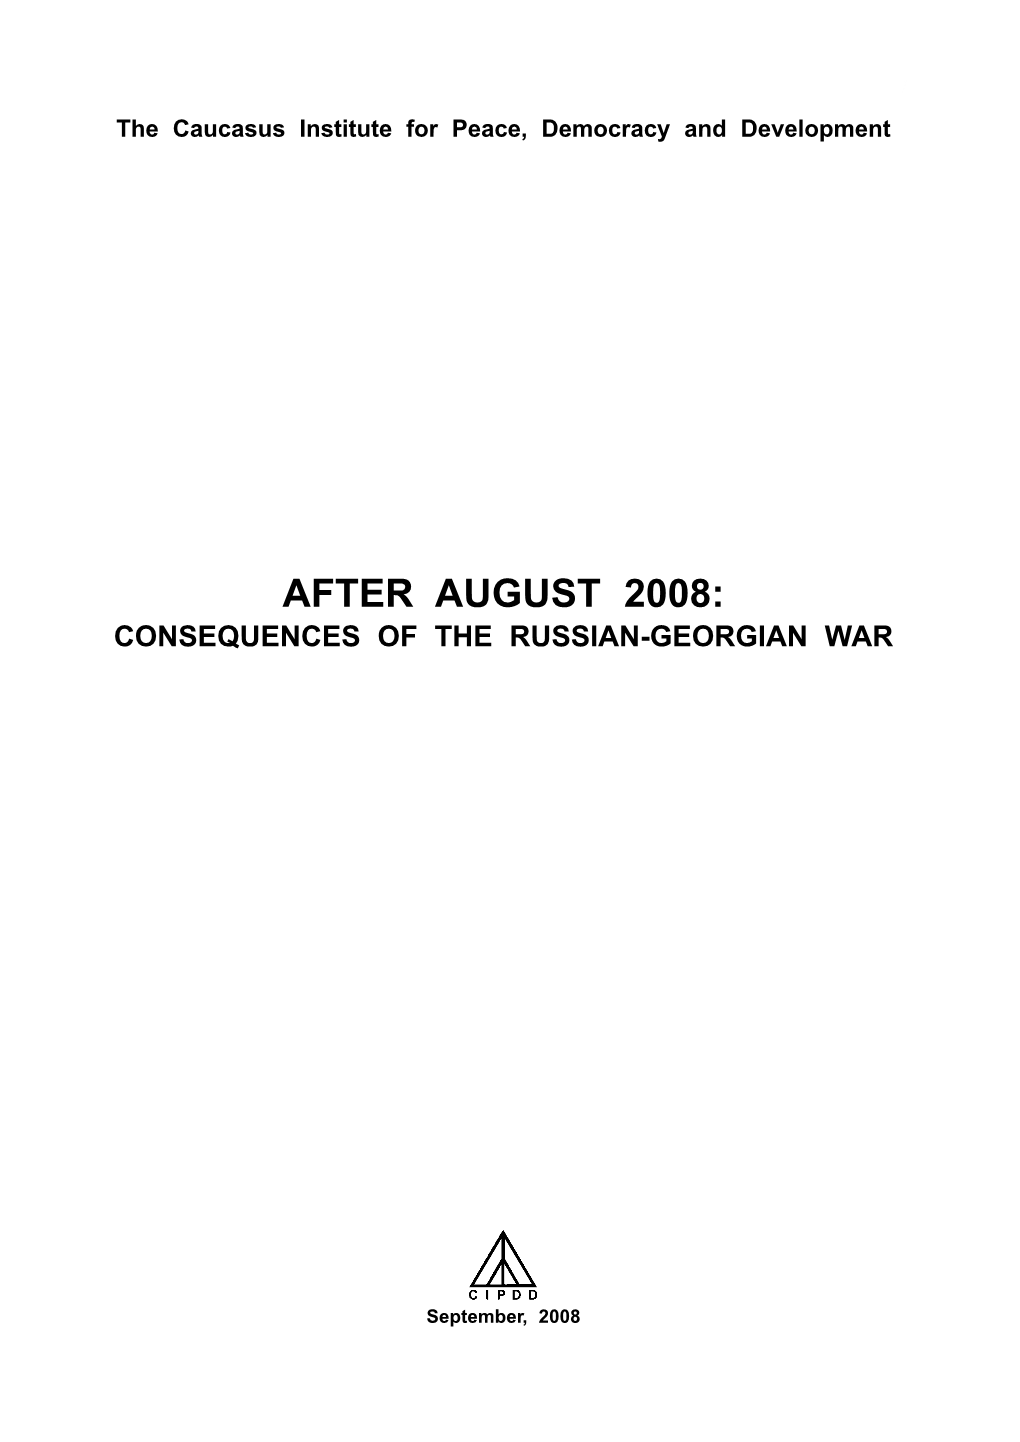 After August 2008: Consequences of the Russian-Georgian War